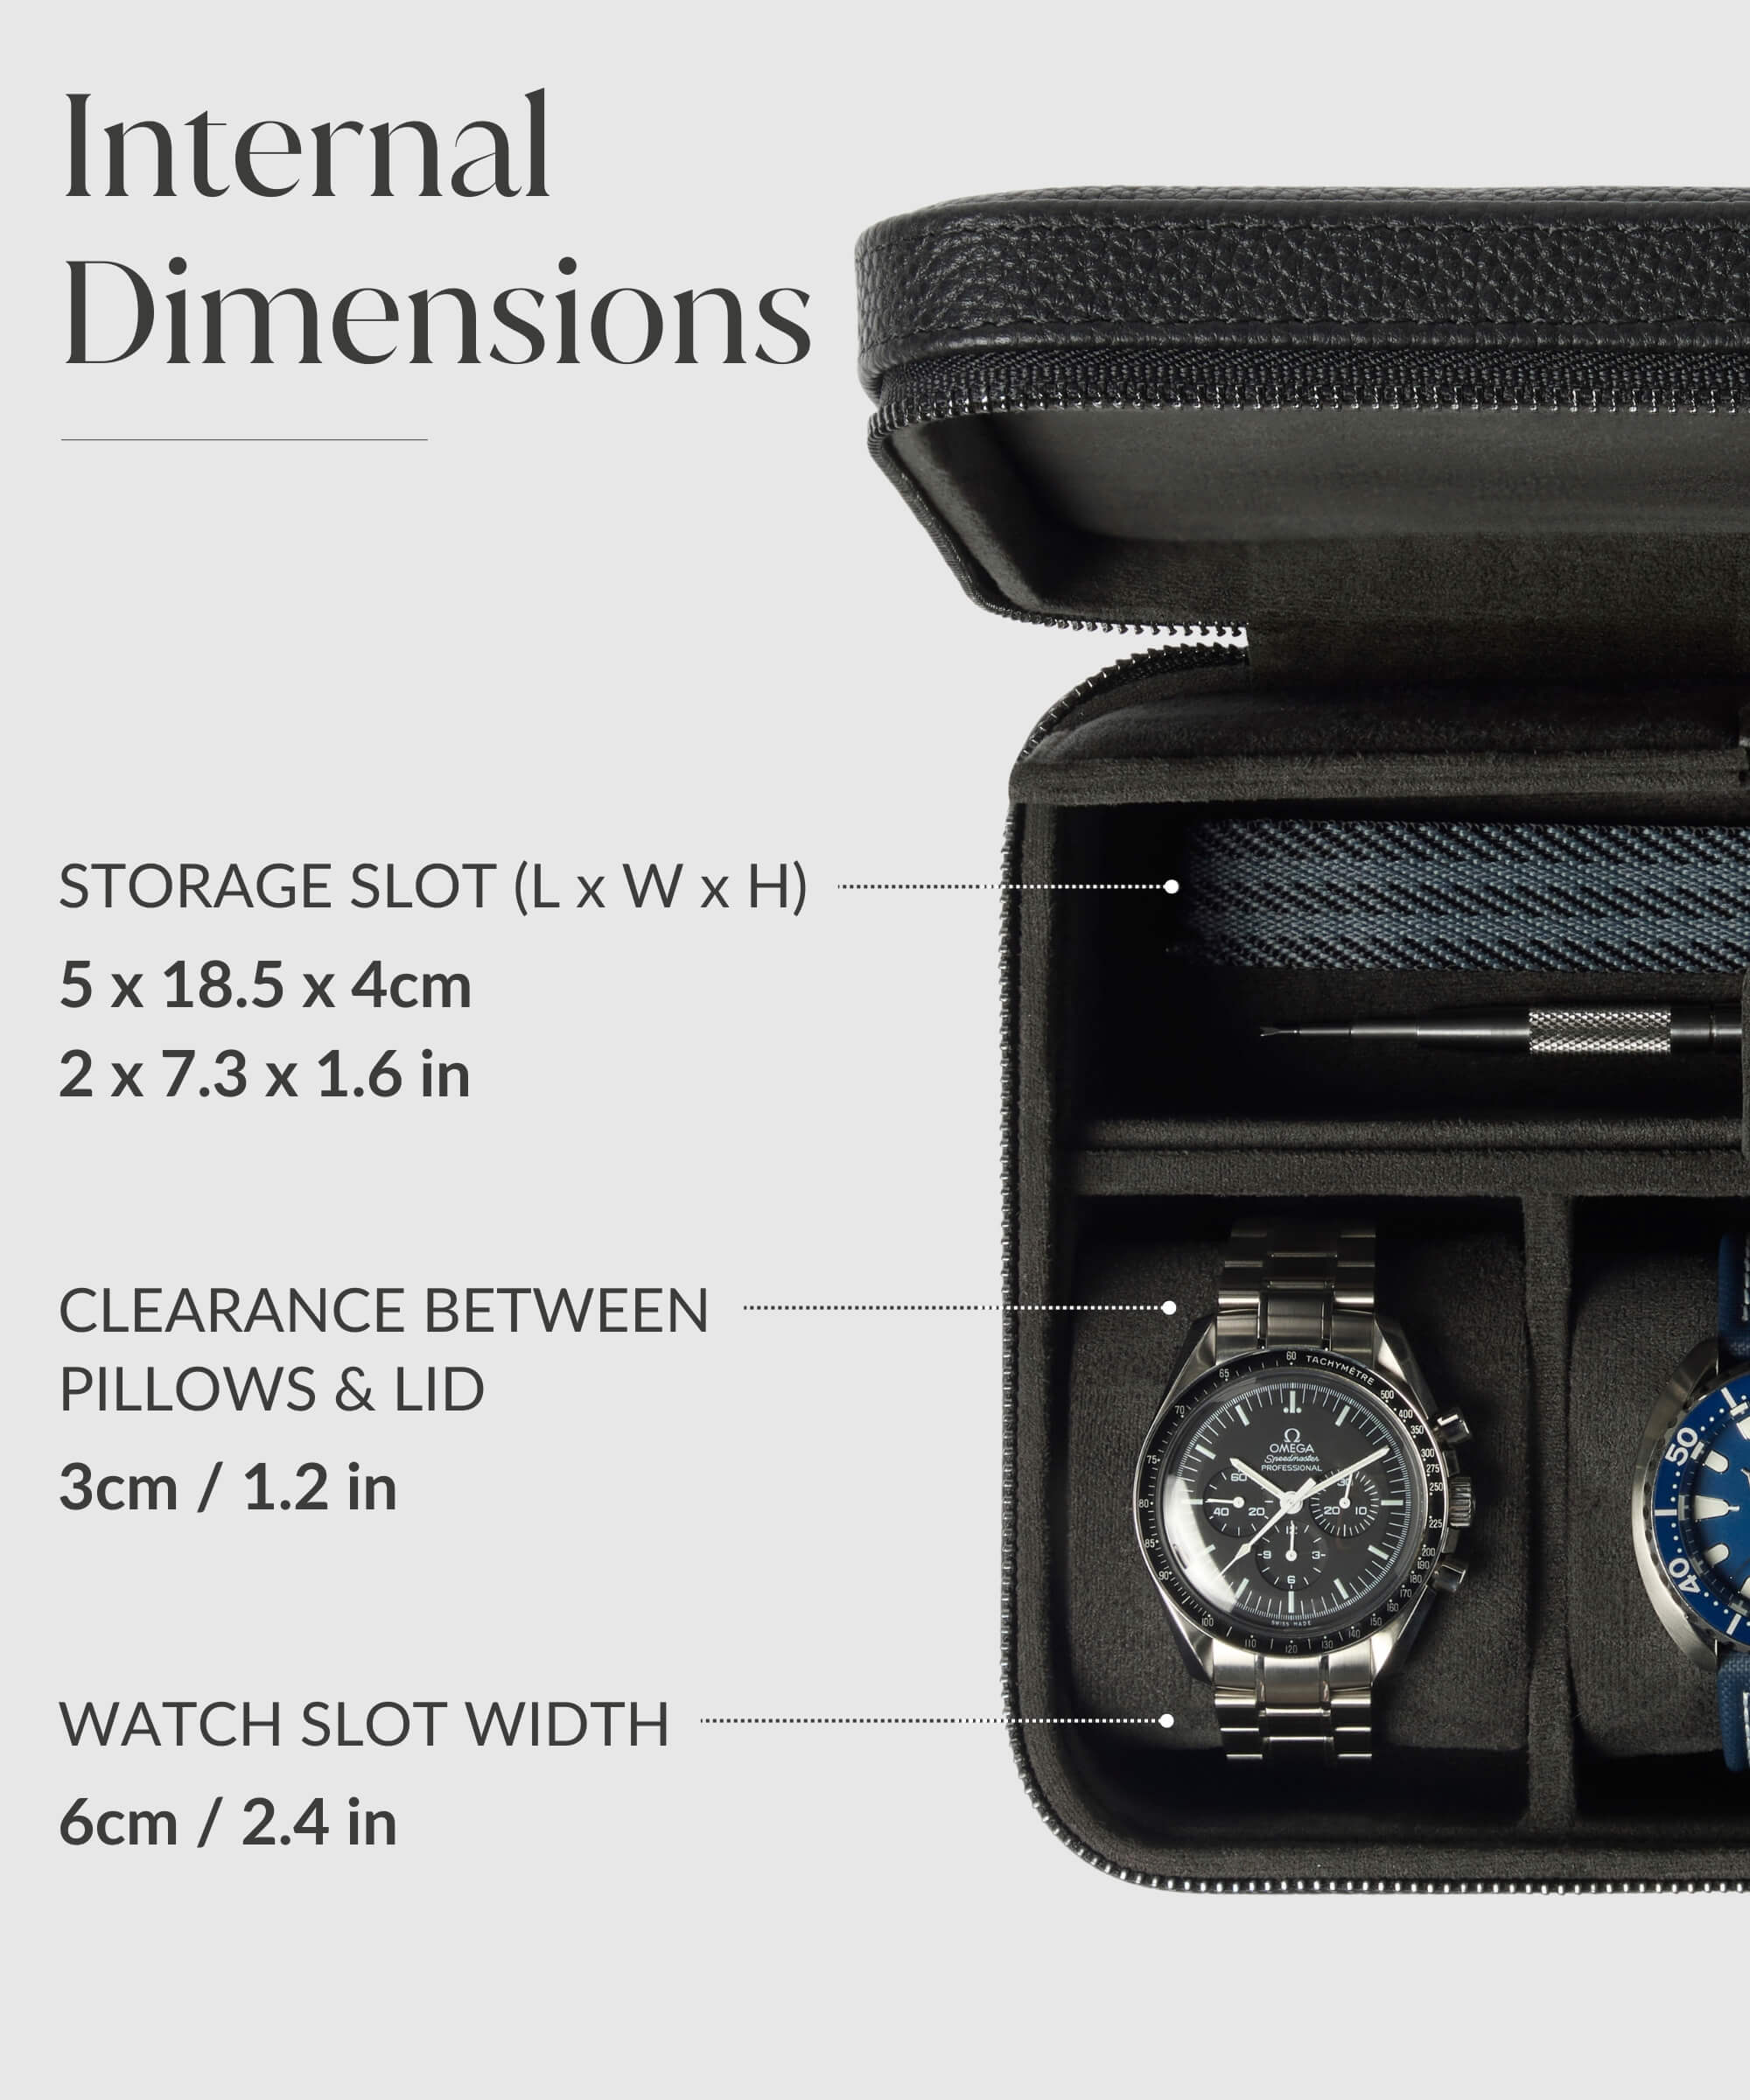 A sleek TAWBURY Fraser 3 Watch Travel Case with Storage - Black designed for convenient storage and showcasing of four watches during your travel experience.